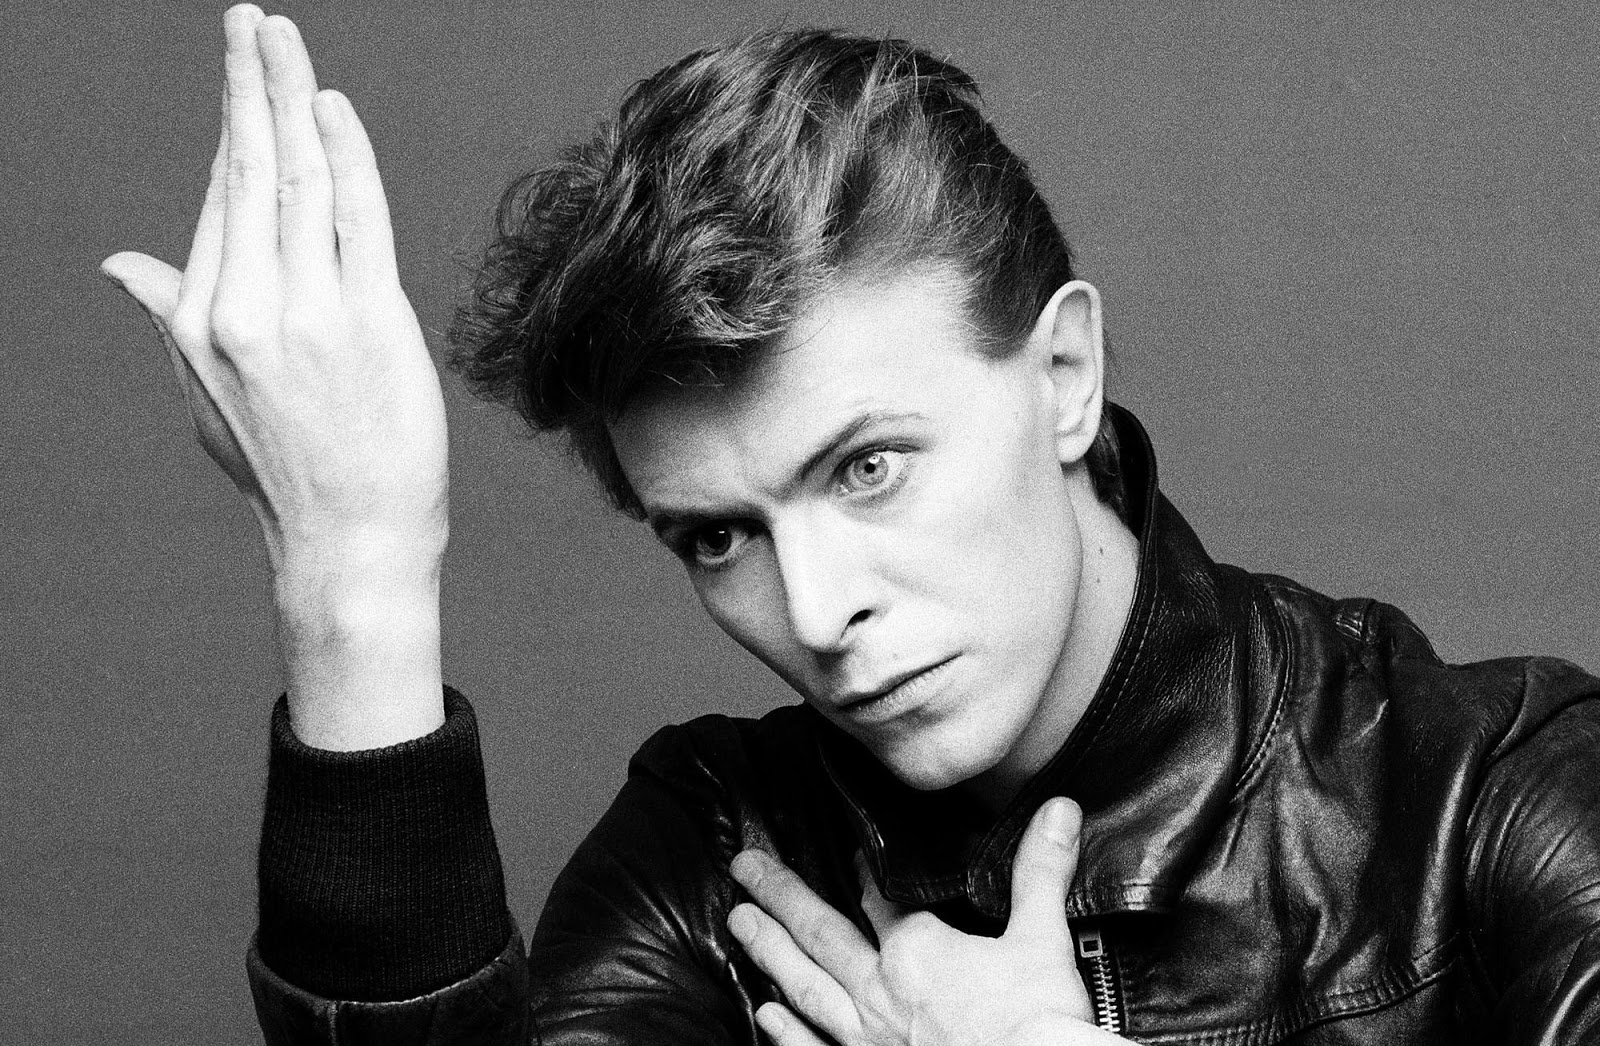 Today S Article David Bowie Quizmaster Trivia Drink While You